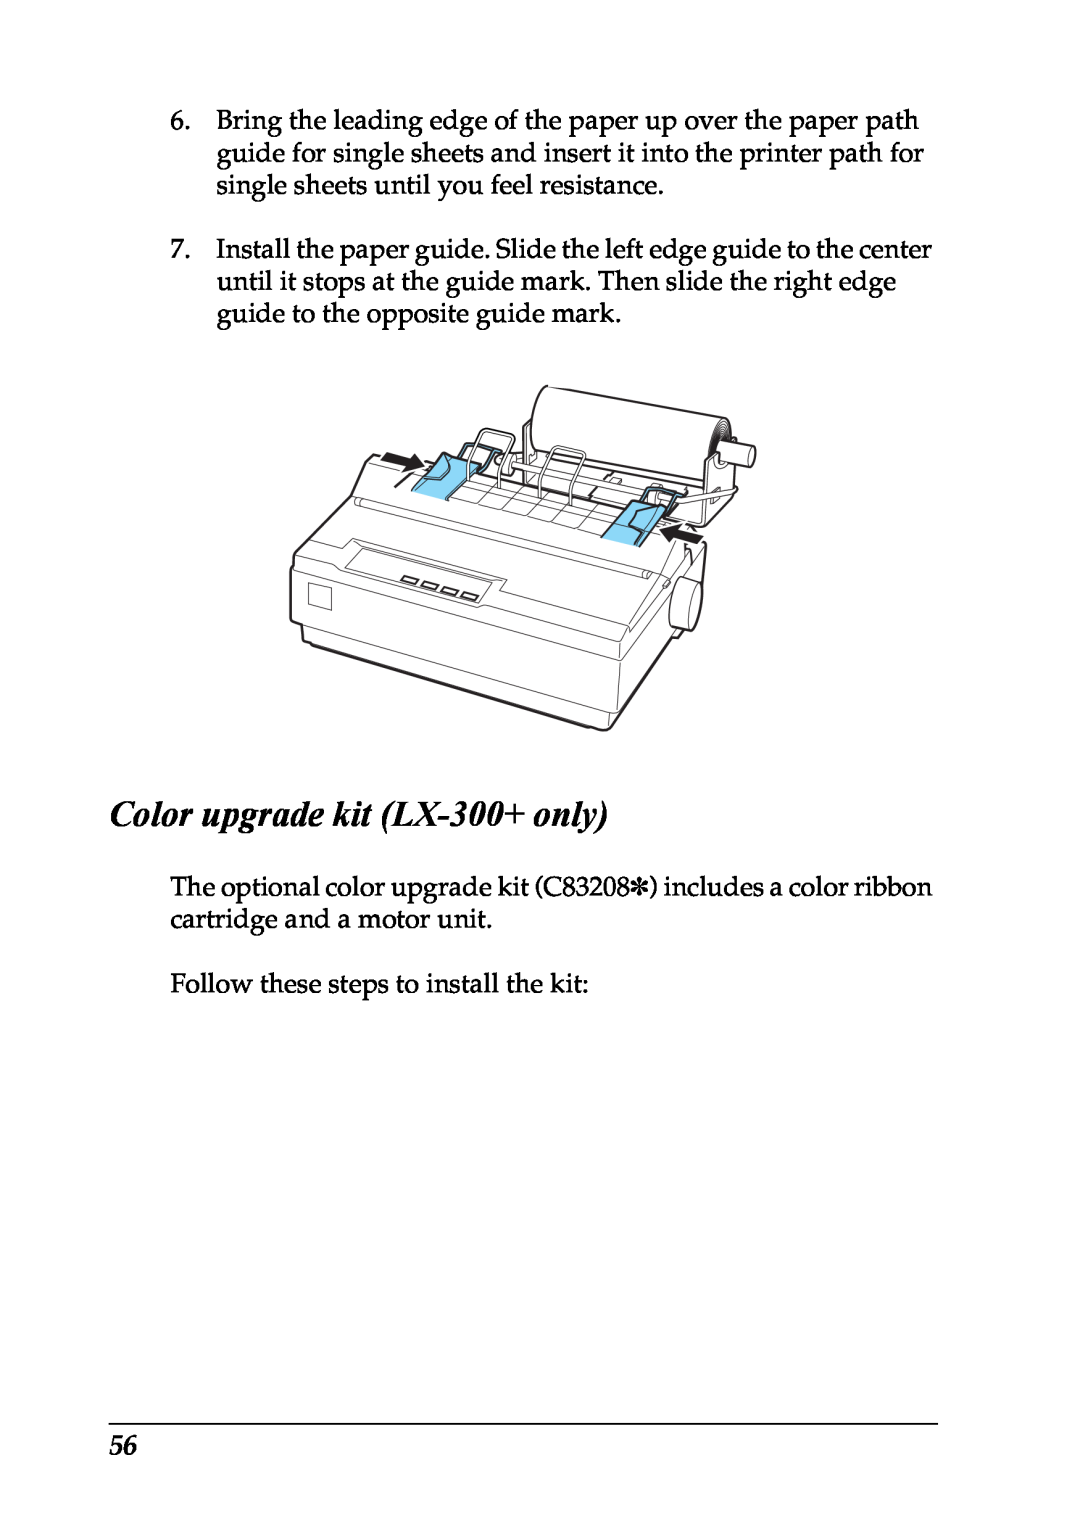 Epson LX-1170 manual Color upgrade kit LX-300+ only 